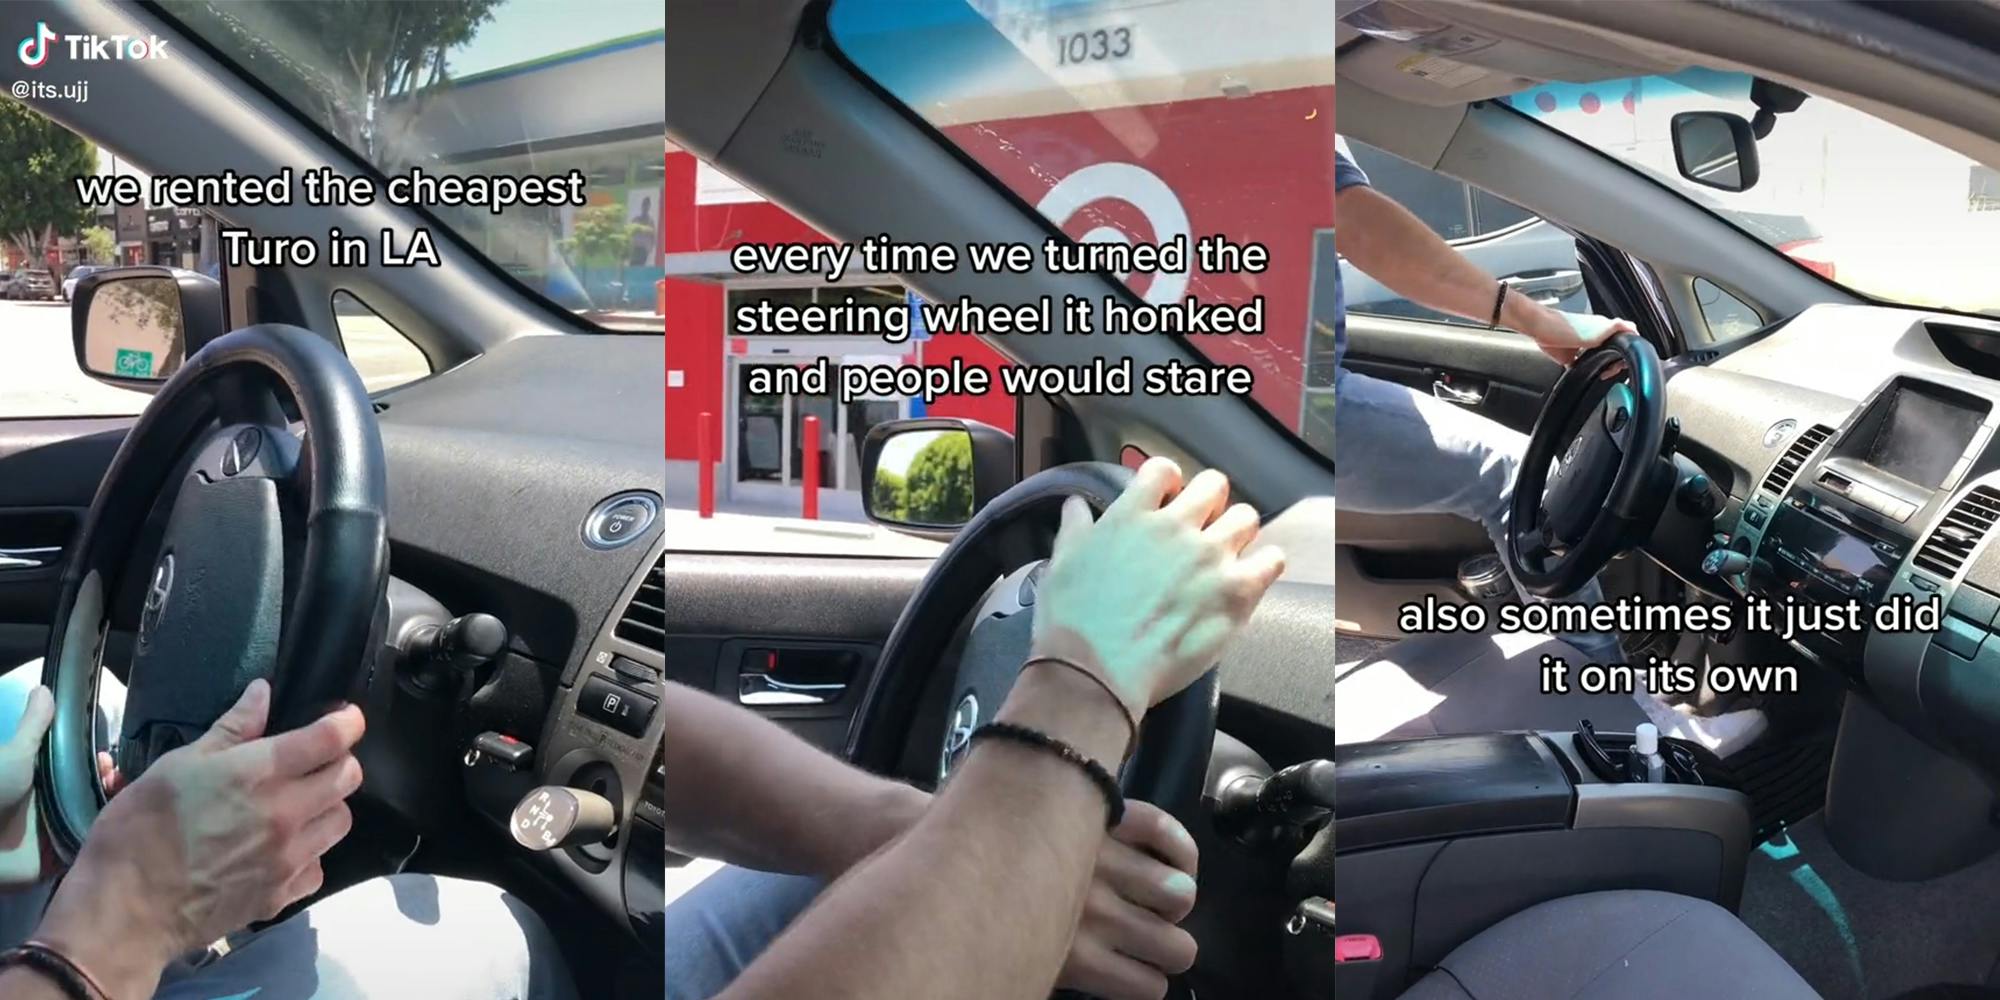 man in car with captions "we rented the cheapest Turo in LA" (l) "every time we turned the steering wheel it honked and people would stare" (c) "also sometimes it just did it on its own" (r)